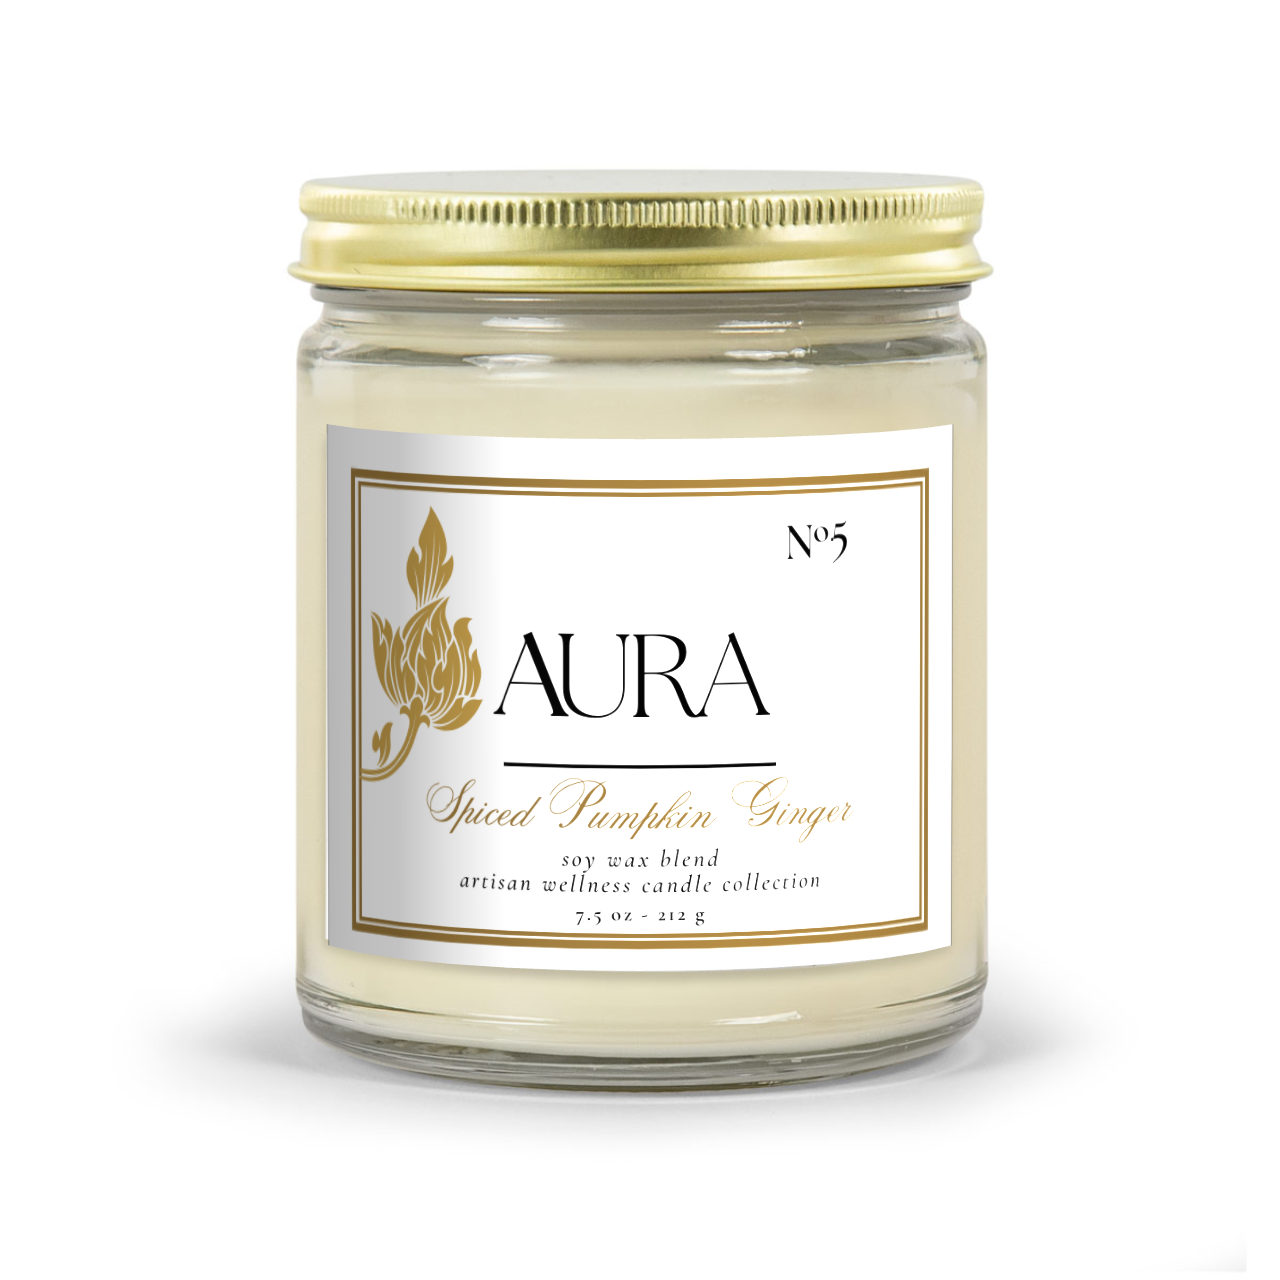 Aromatherapy Candle - Aura Aromas Artisan Wellness Candle Collection:  Classic Amber Or Classic Clear Vessel Spiced Pumpkin Ginger Scent